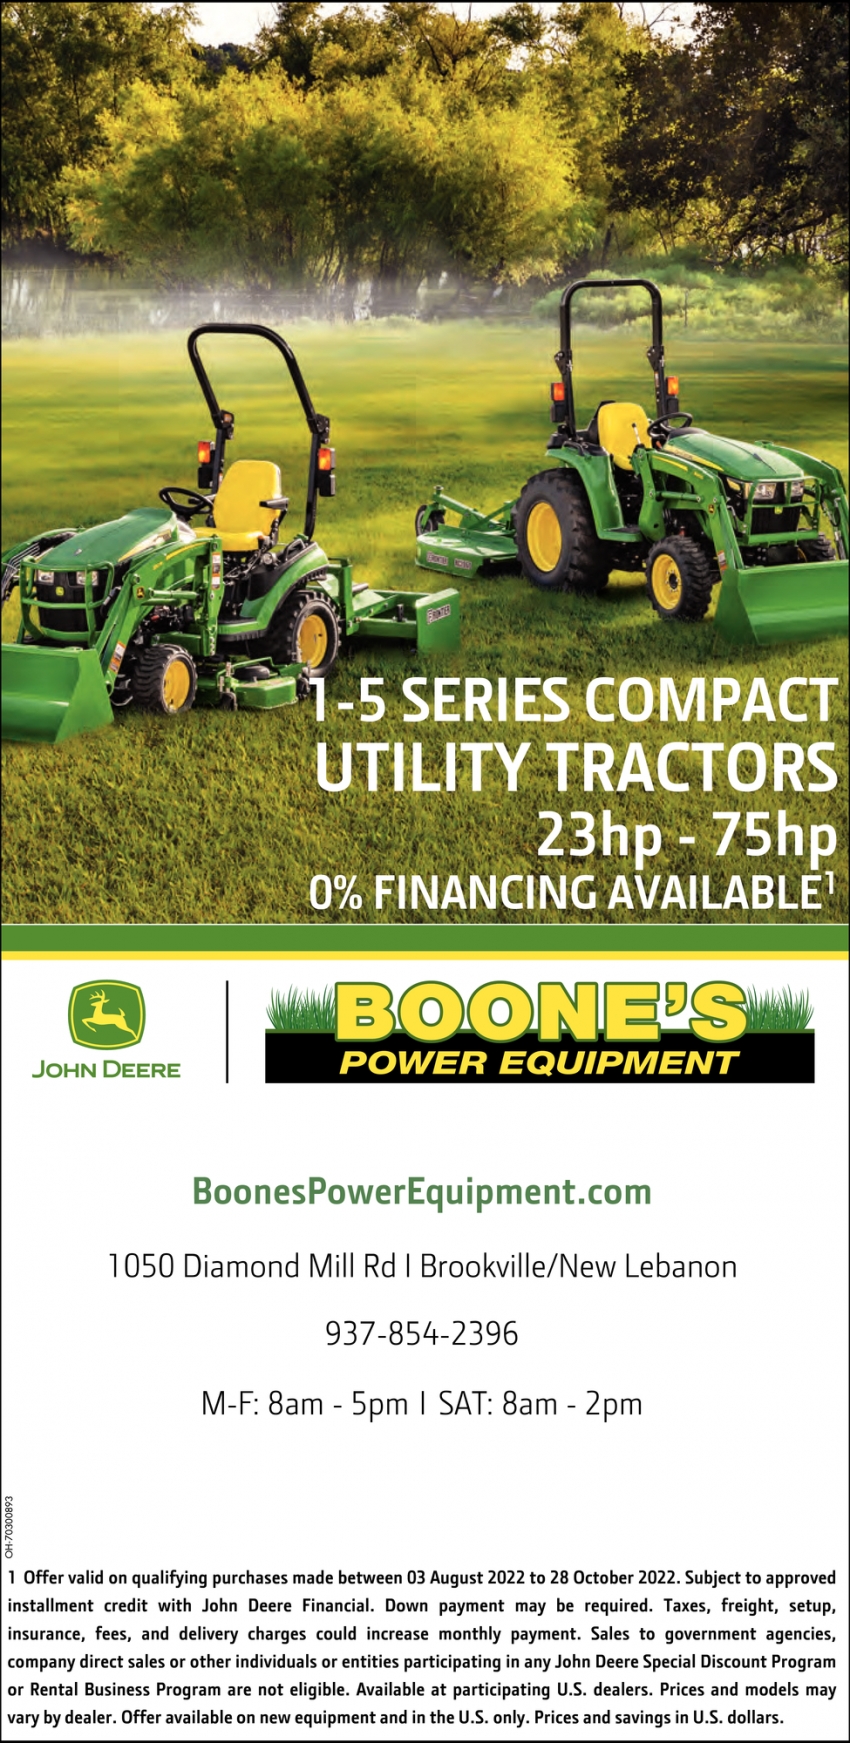 1-5 Series Compact Utility Tractors